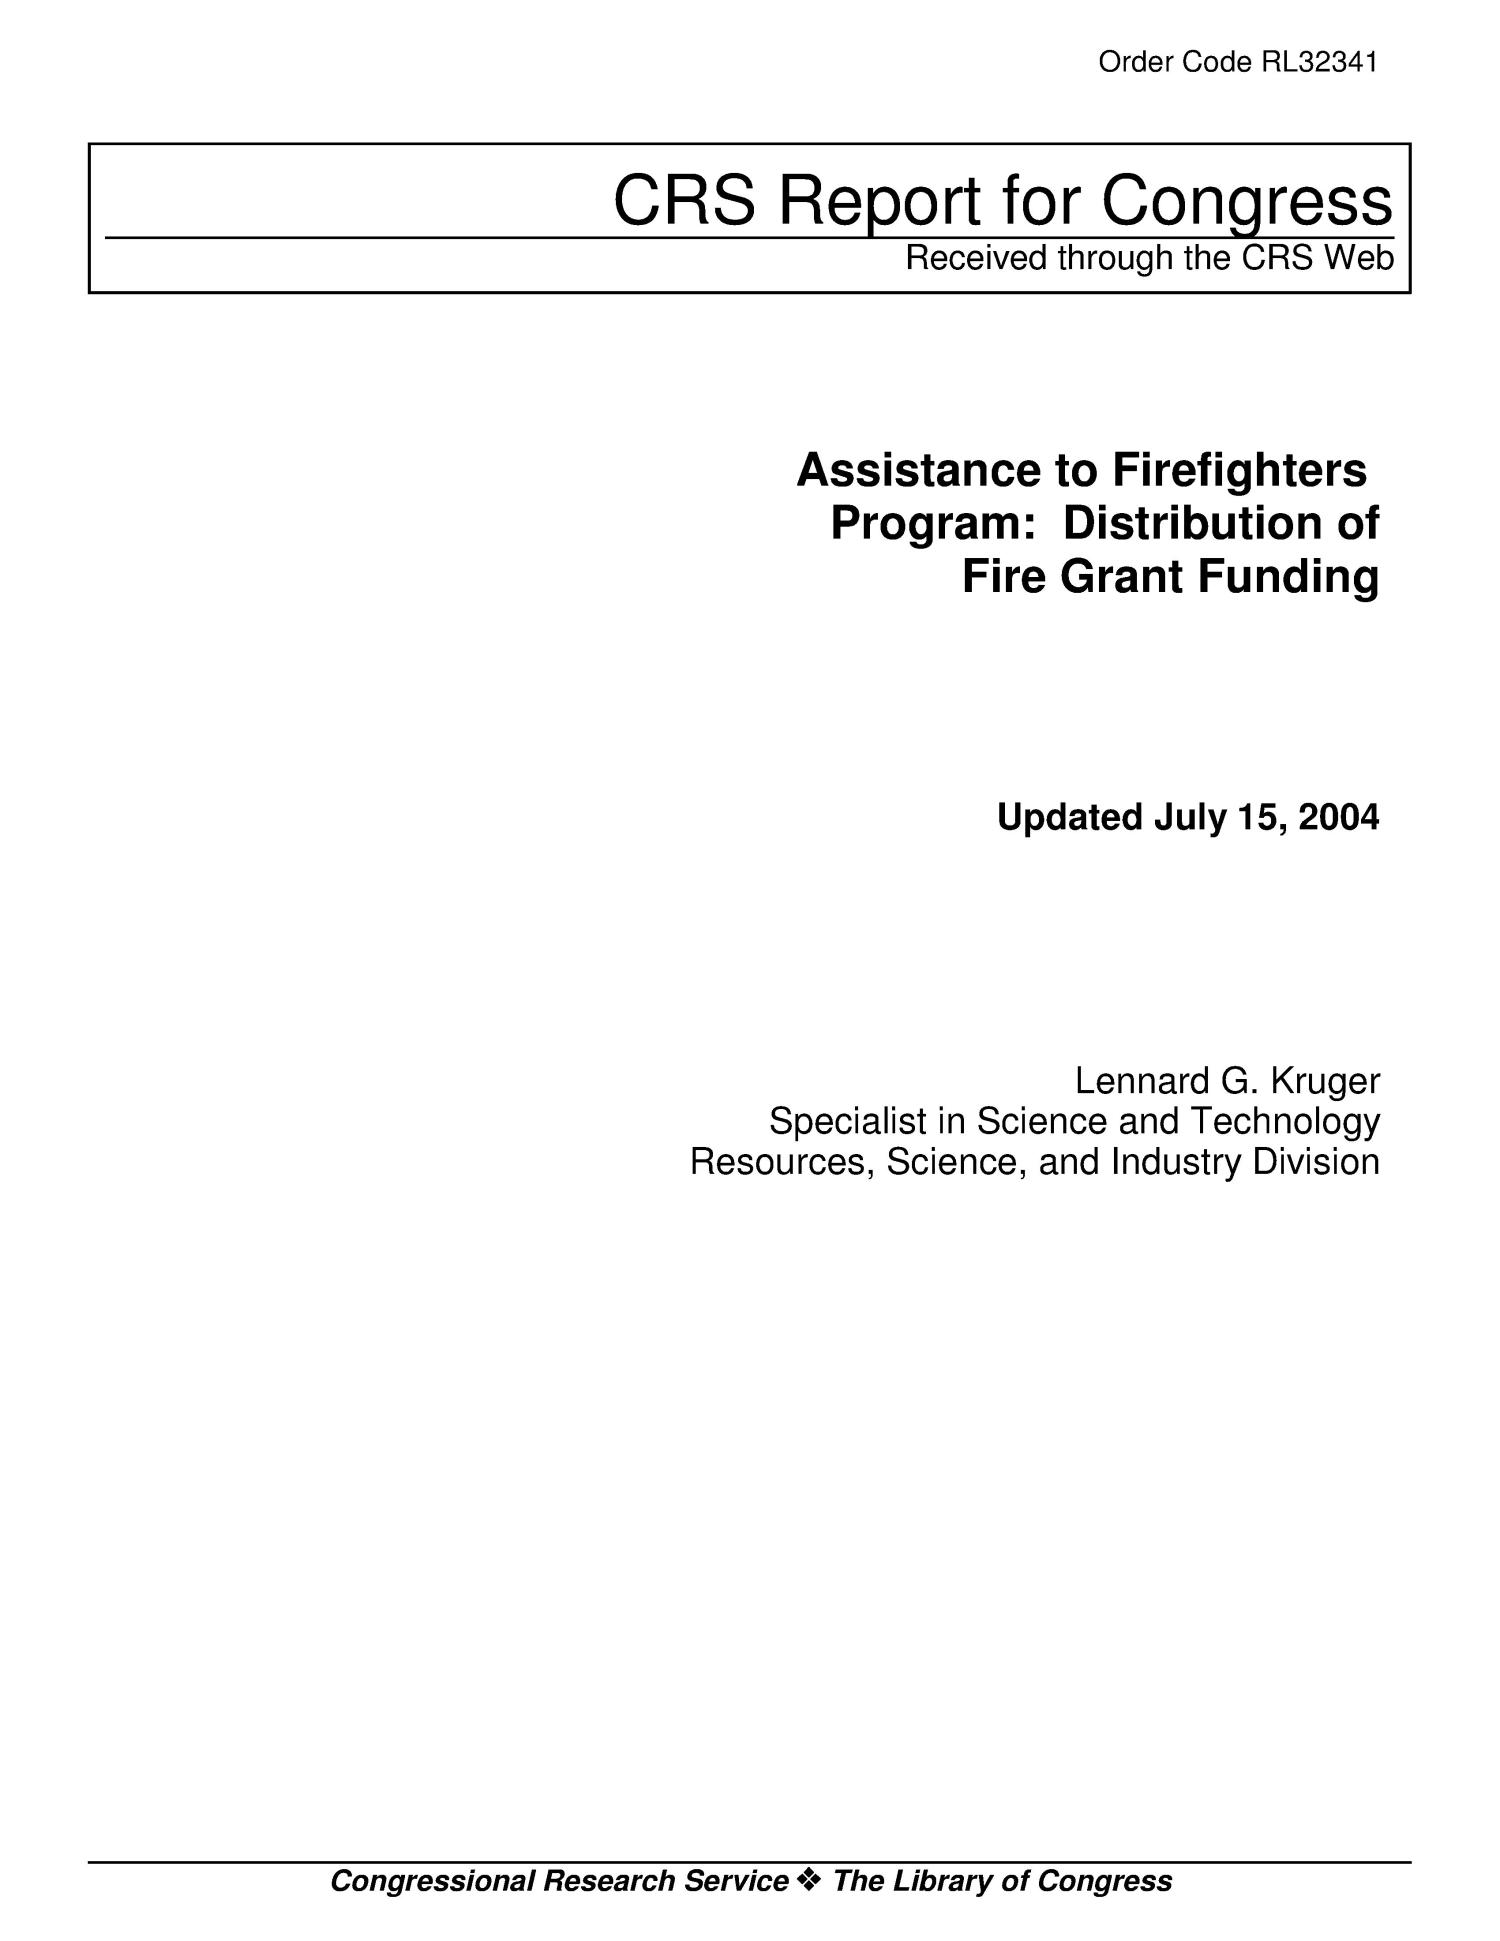 Assistance to Firefighters Program: Distribution of Fire Grant Funding
                                                
                                                    [Sequence #]: 1 of 16
                                                